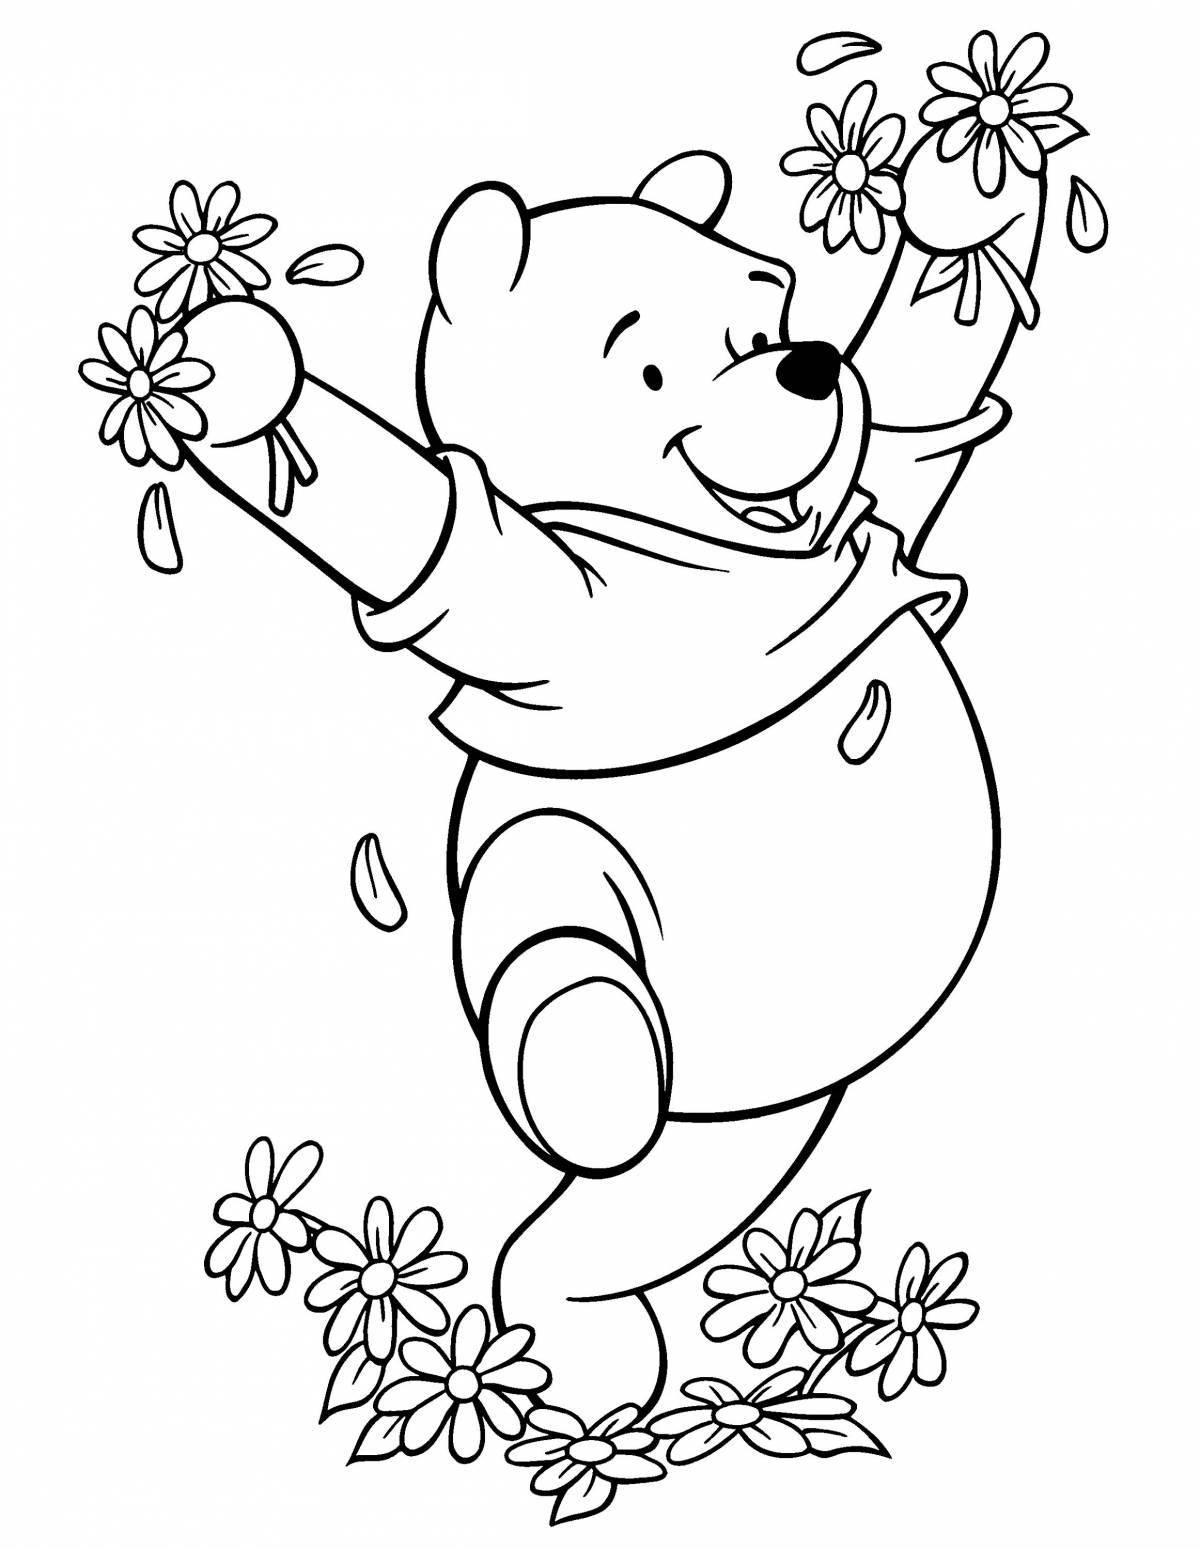 Coloring book playful winnie the pooh